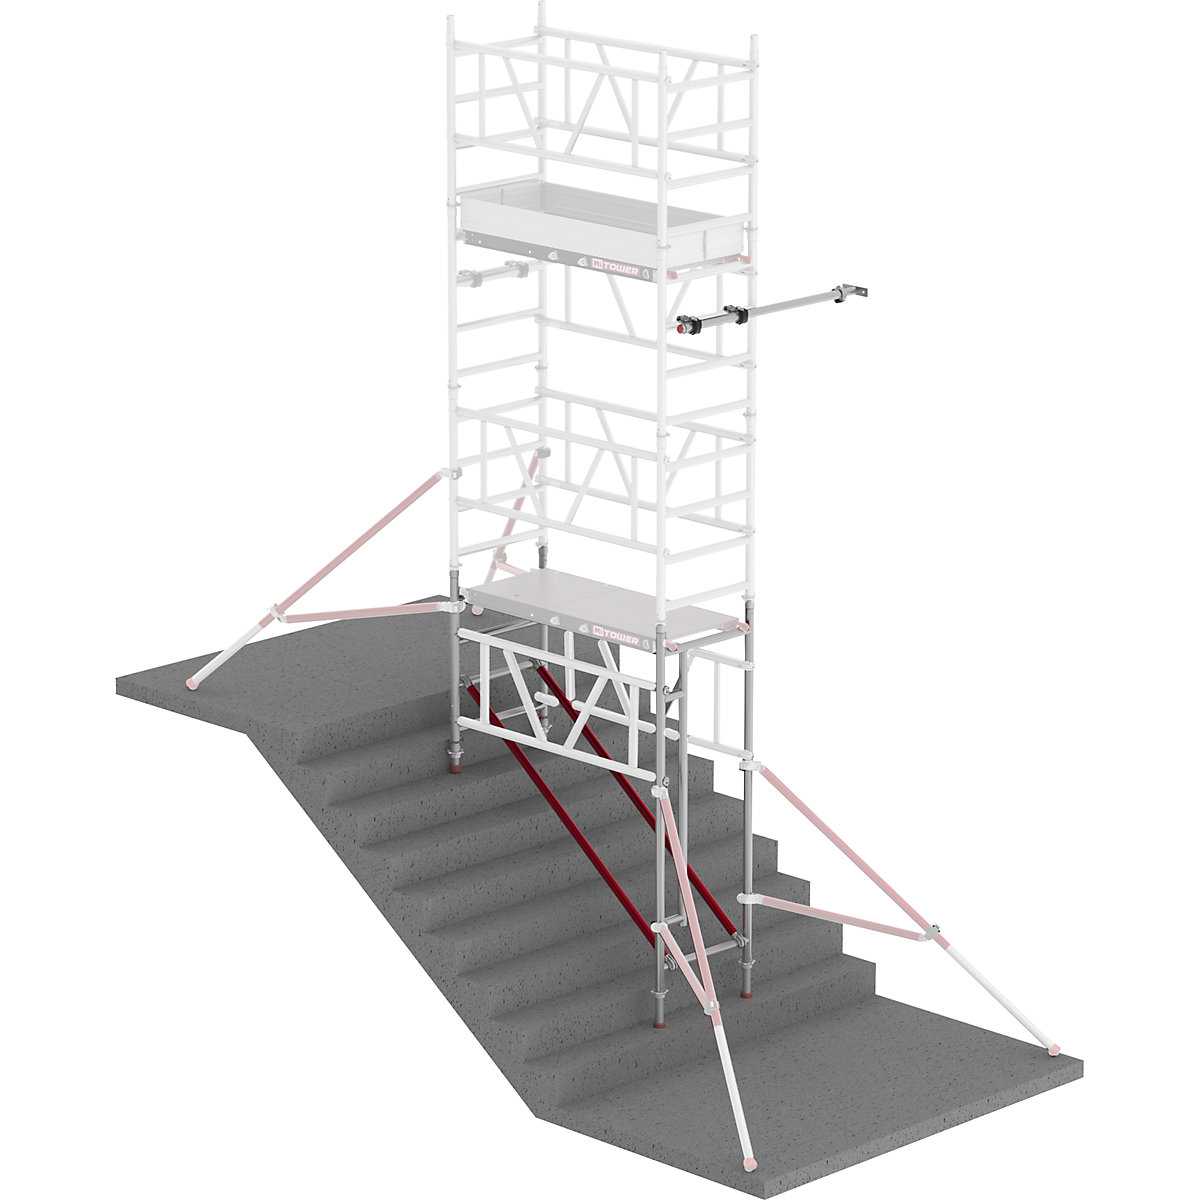 MiTOWER STAIRS extension module - Altrex